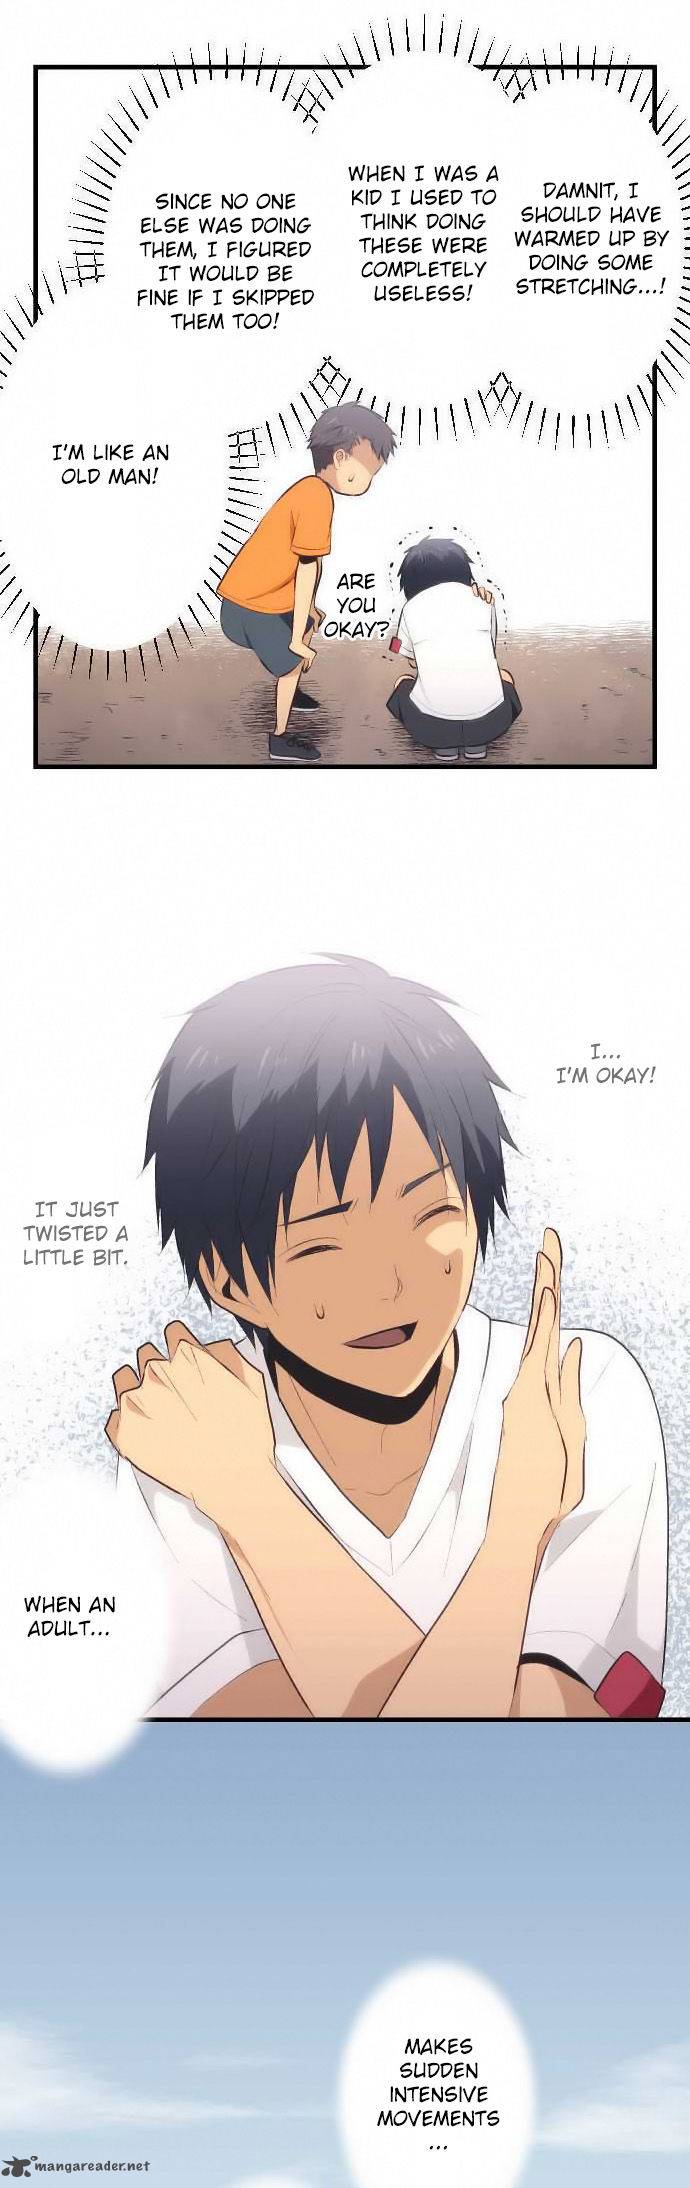 Relife 28 6